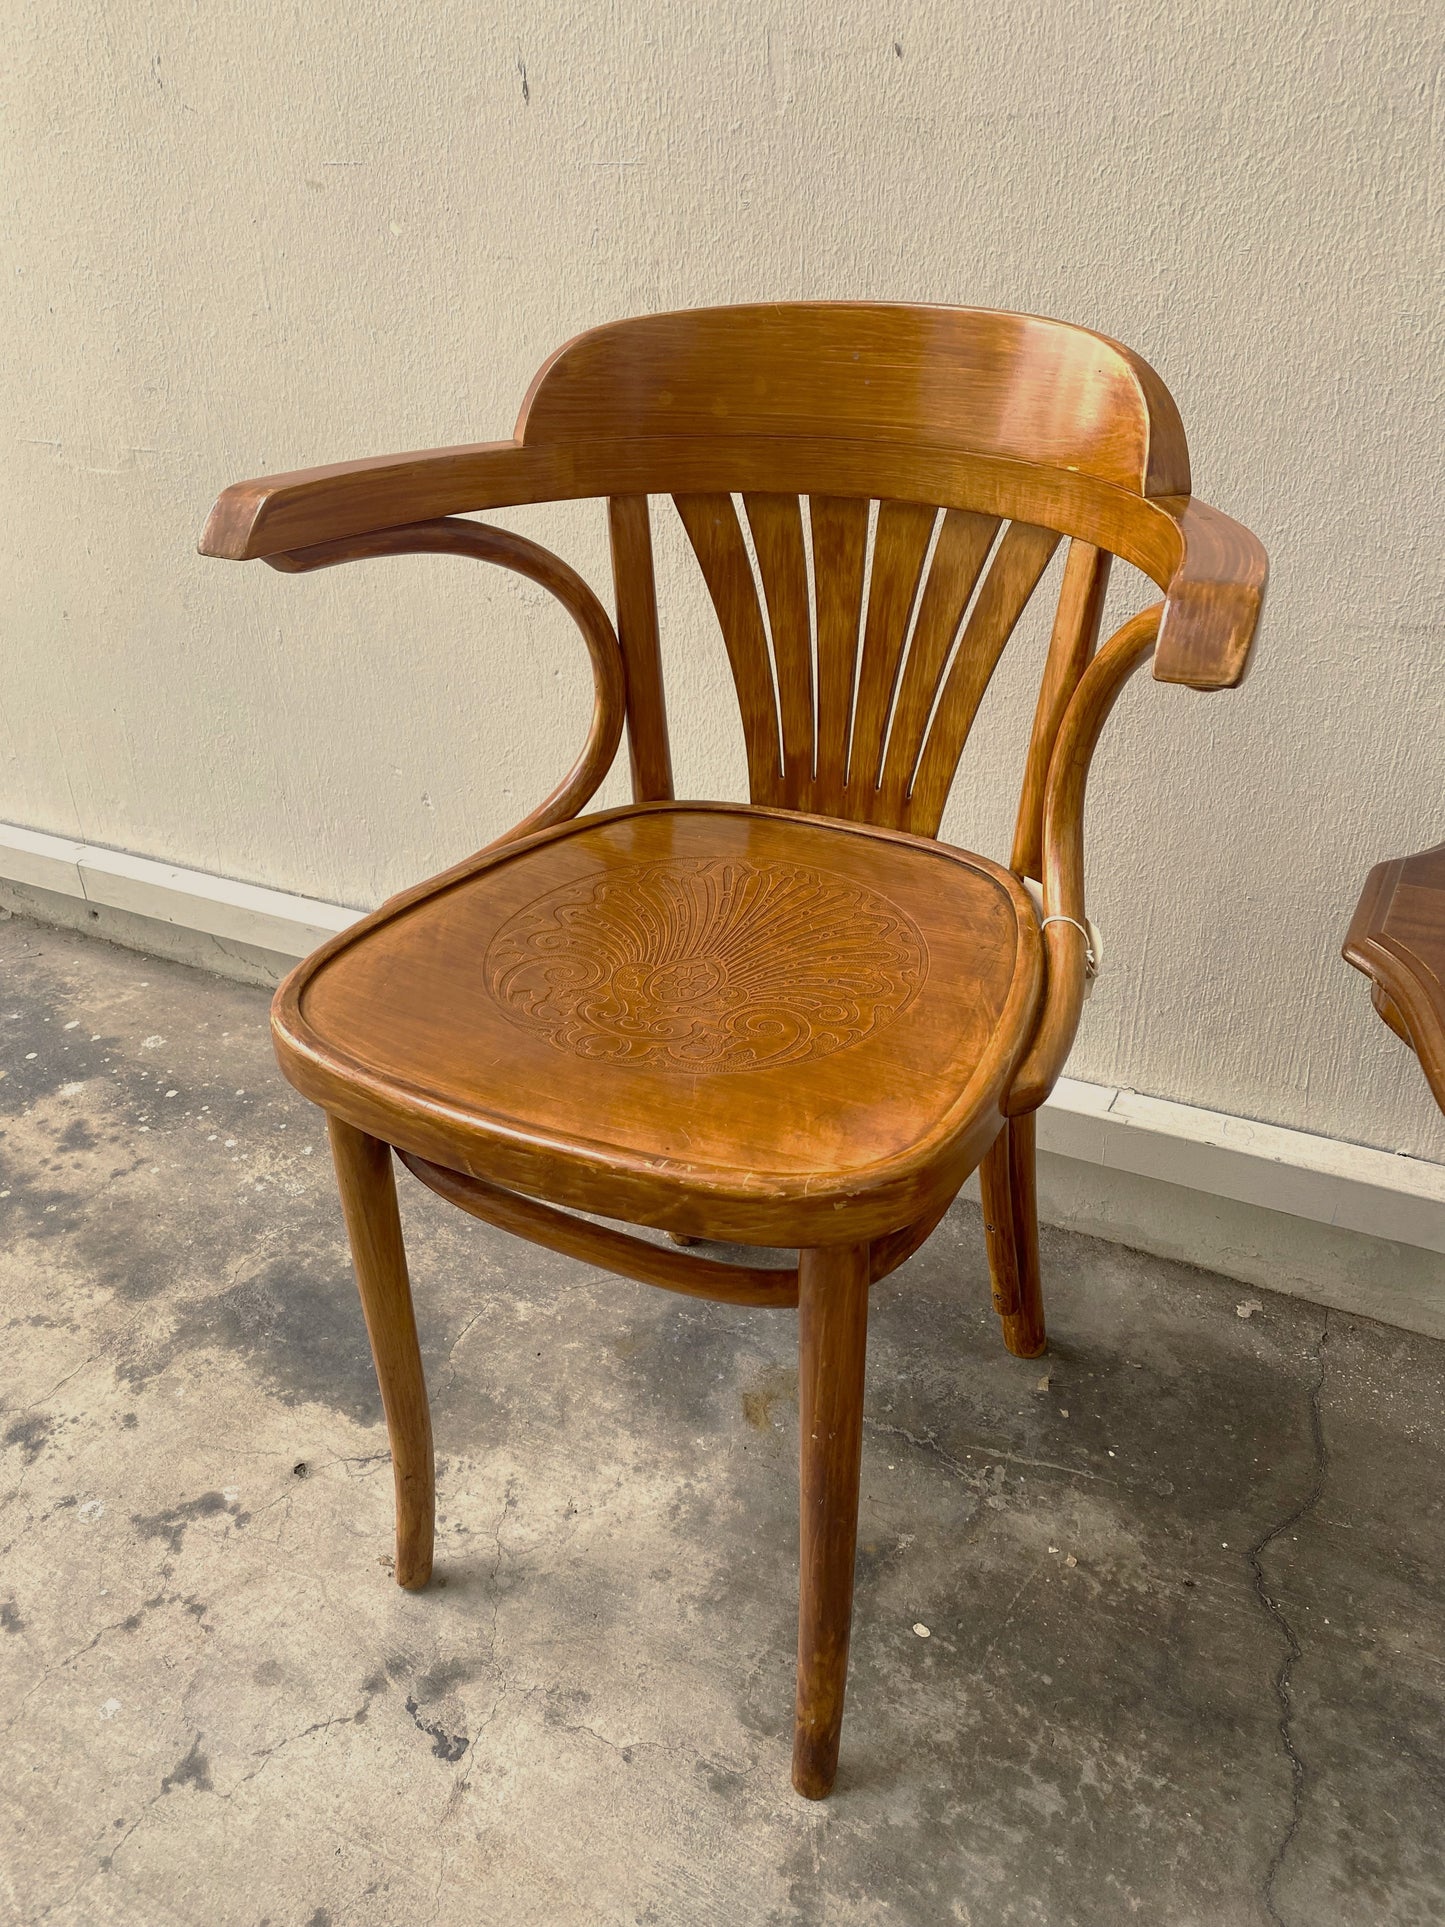 Vintage Wooden Chair With Embossed Seat